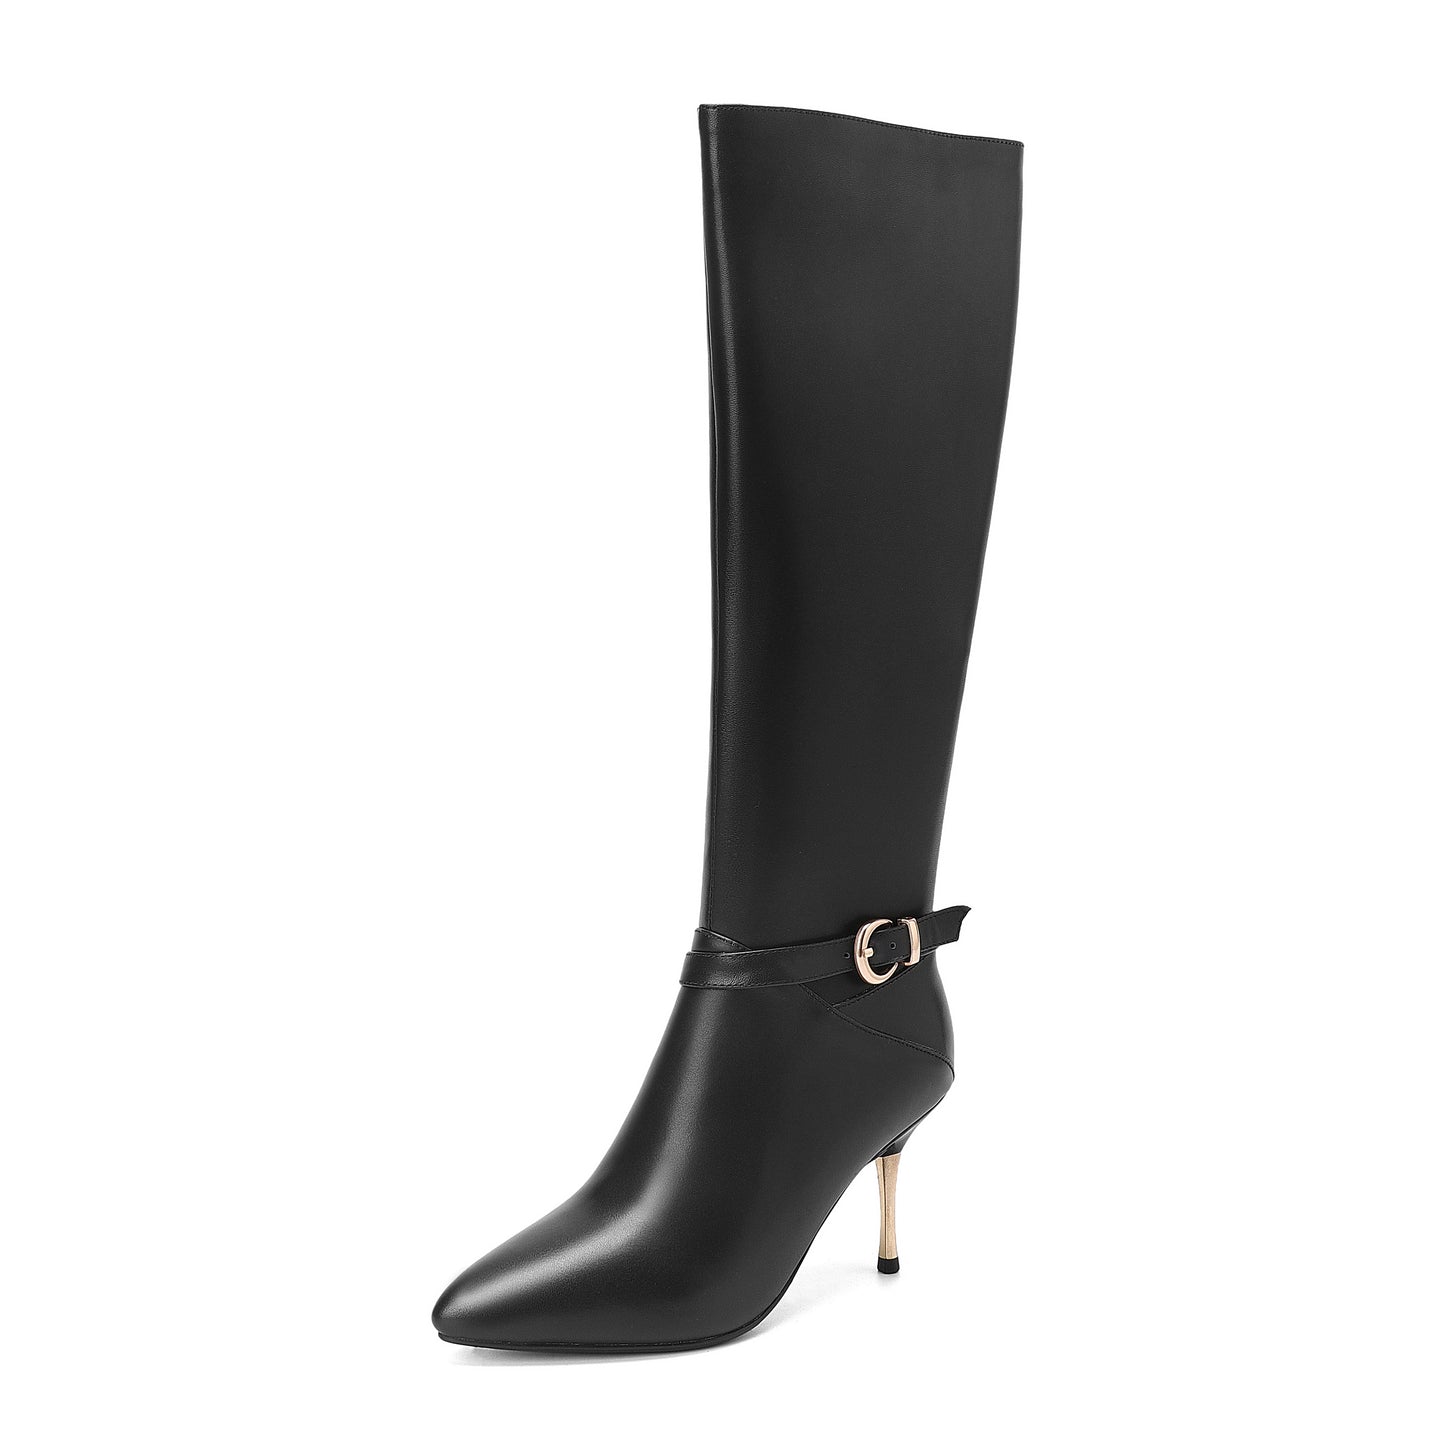 TinaCus Women's Genuine Leather Sexy Pointed Toe High Stiletto Heel Handmade Side Zip Knee High Boots with Buckle